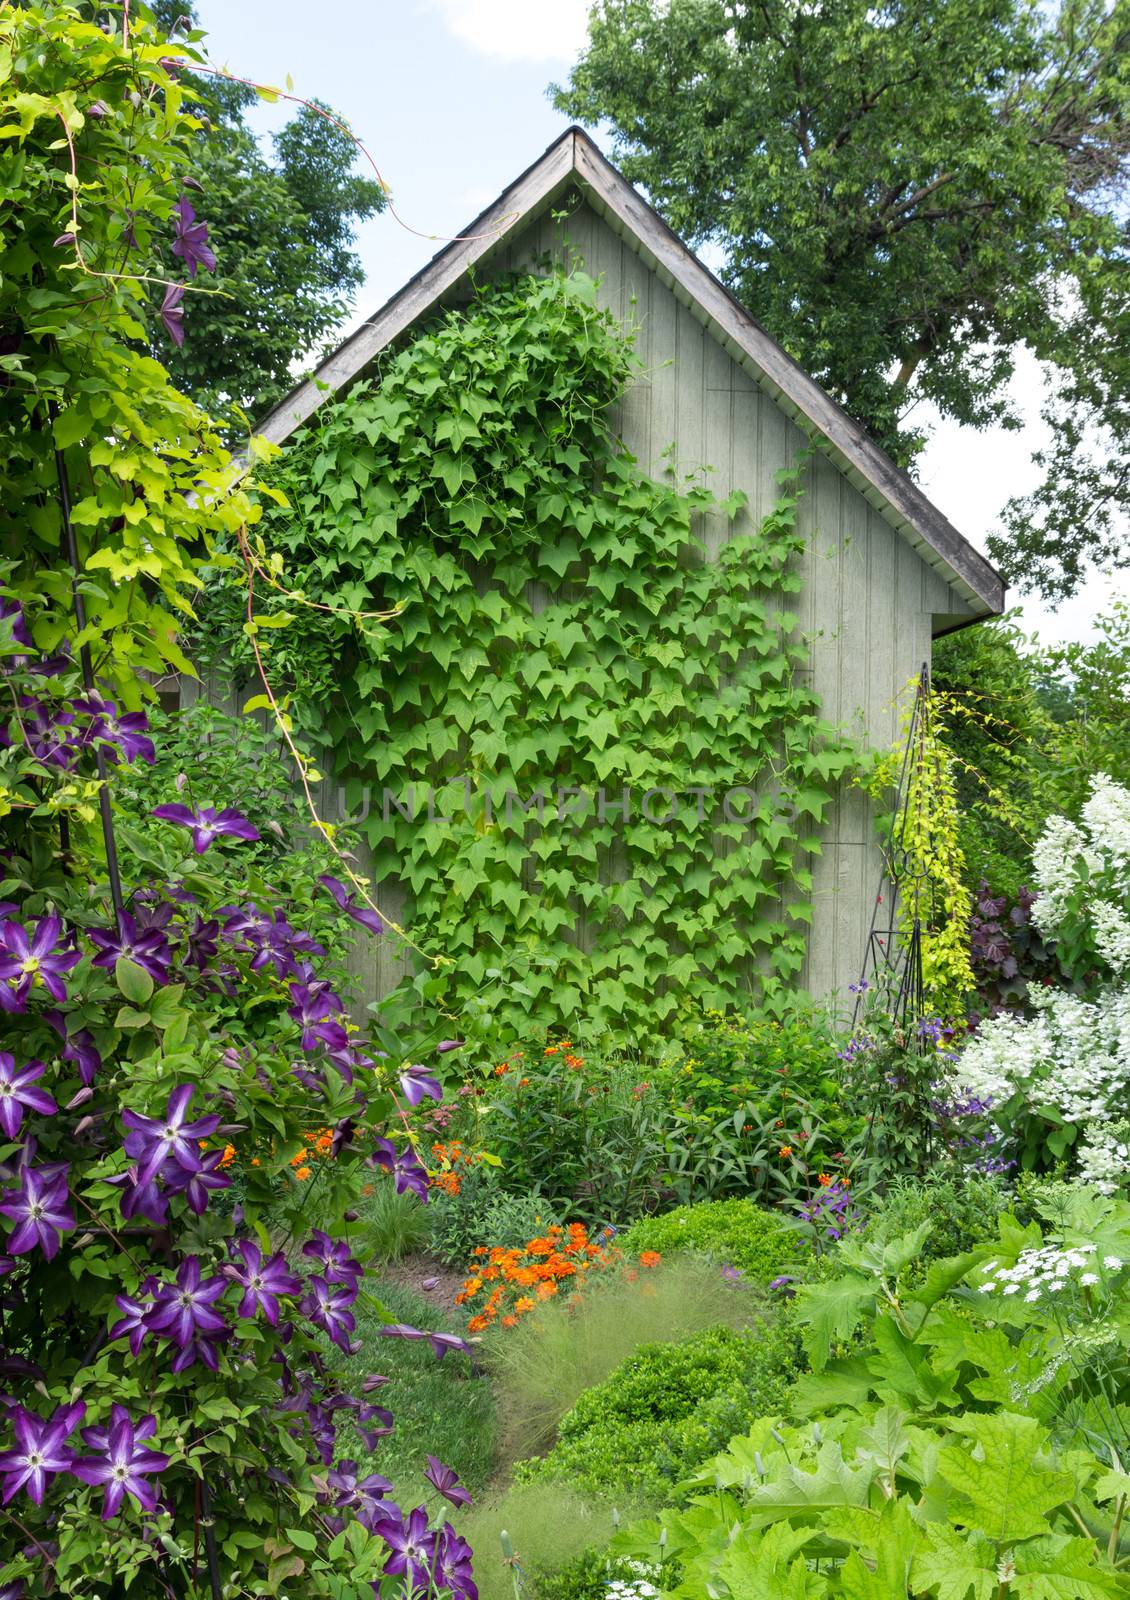 Little house in a flowering garden, ivy crawling up the wall.